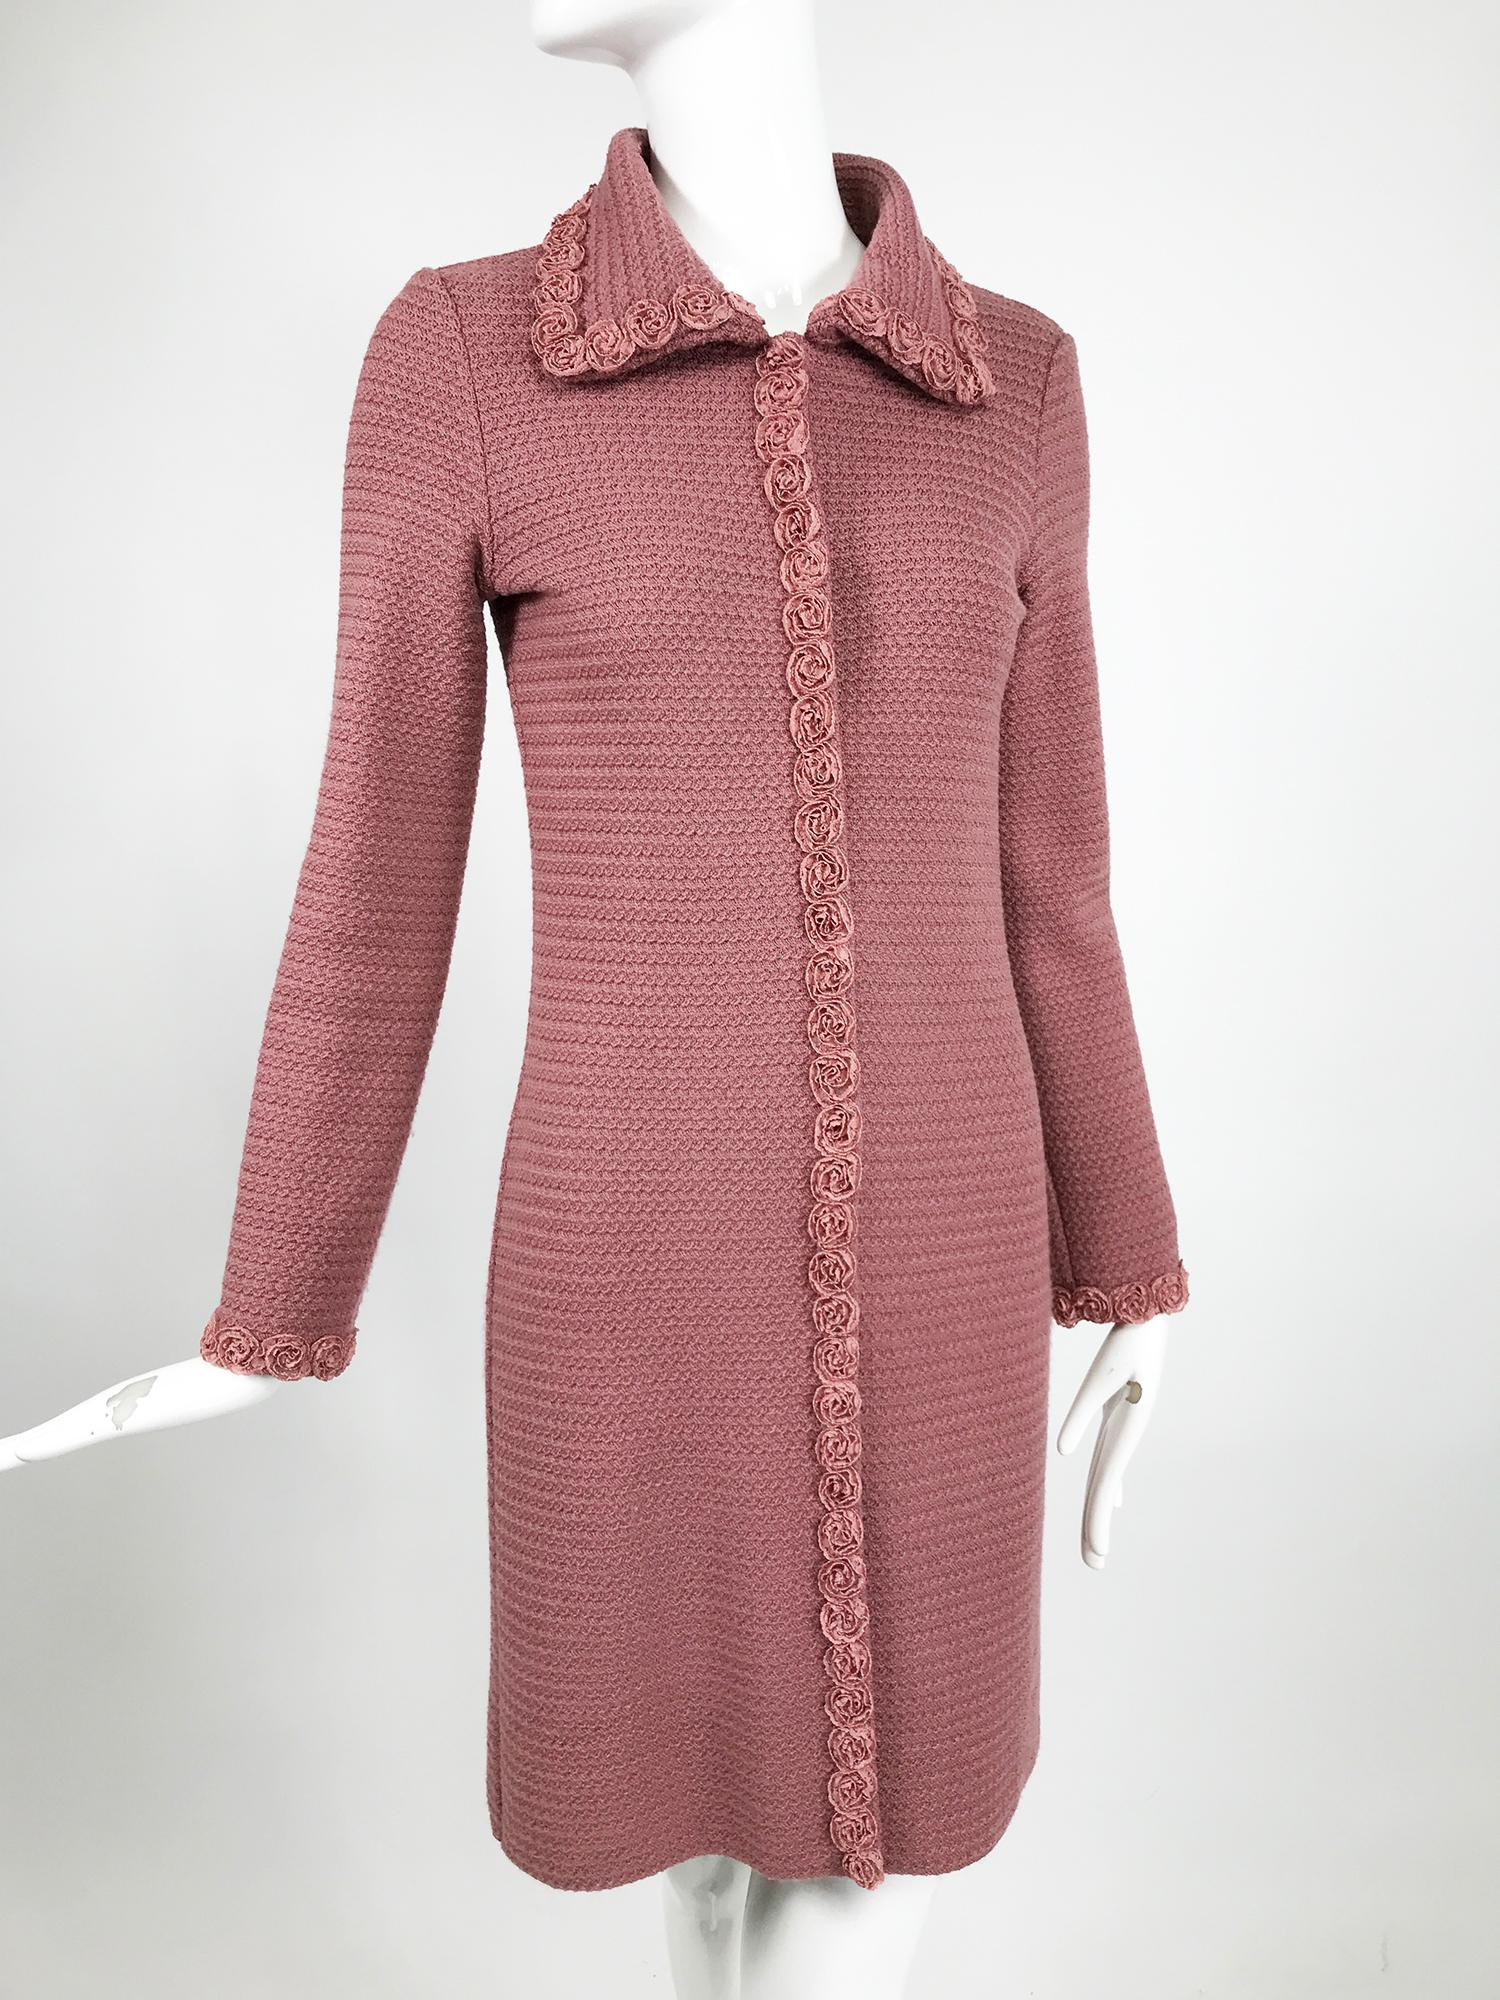 Moschino pink wool knit coat with rosette lace trims. Long sleeve coat closes at the front with hidden fabric covered snaps. The single breasted coat has a slim shape. Wing collar. The coat is lined in pink crepe, pink gros grain ribbon face the